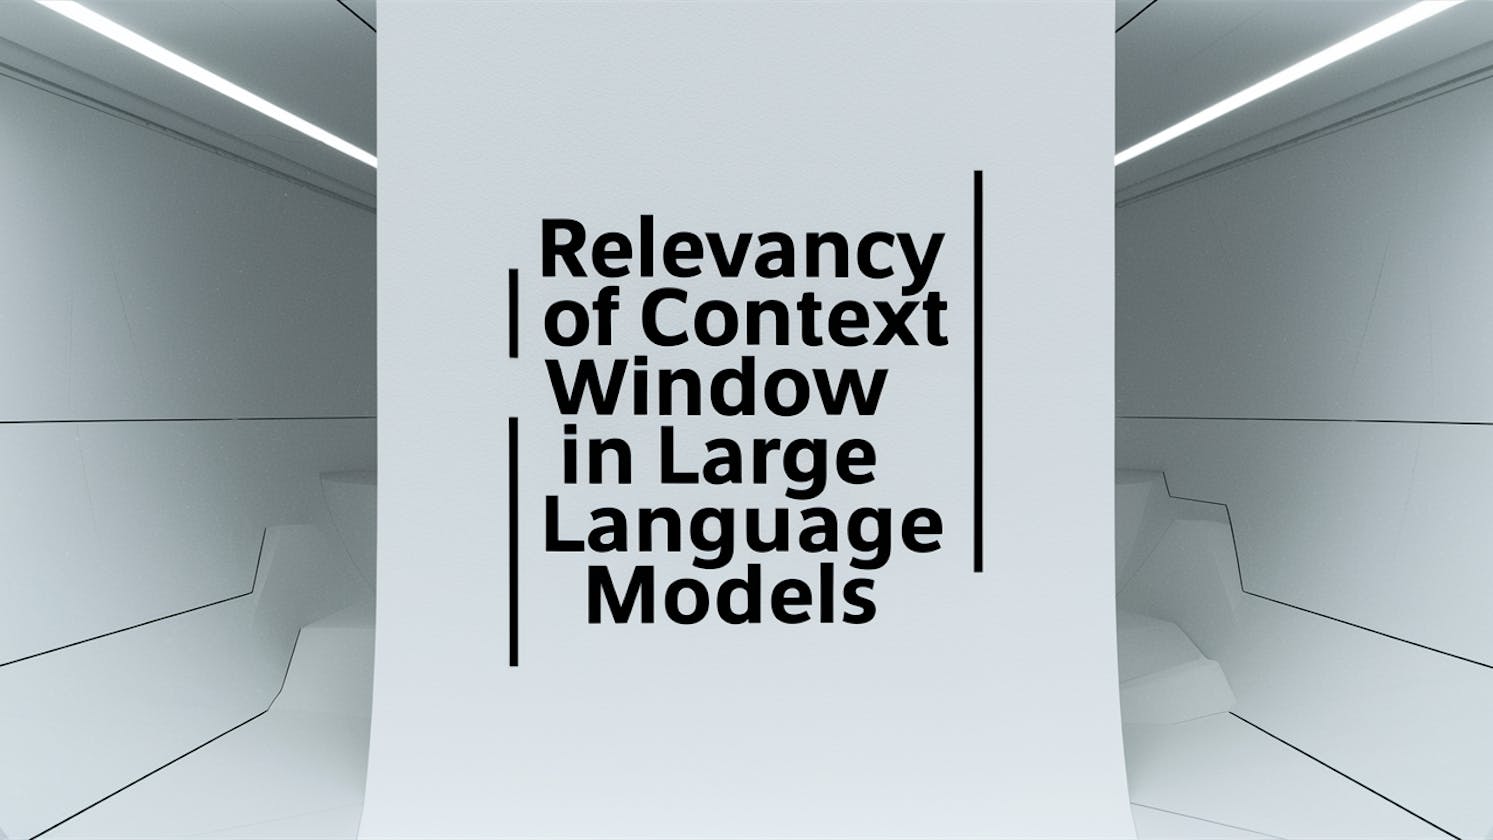 How are context windows even relevant for LLMS?